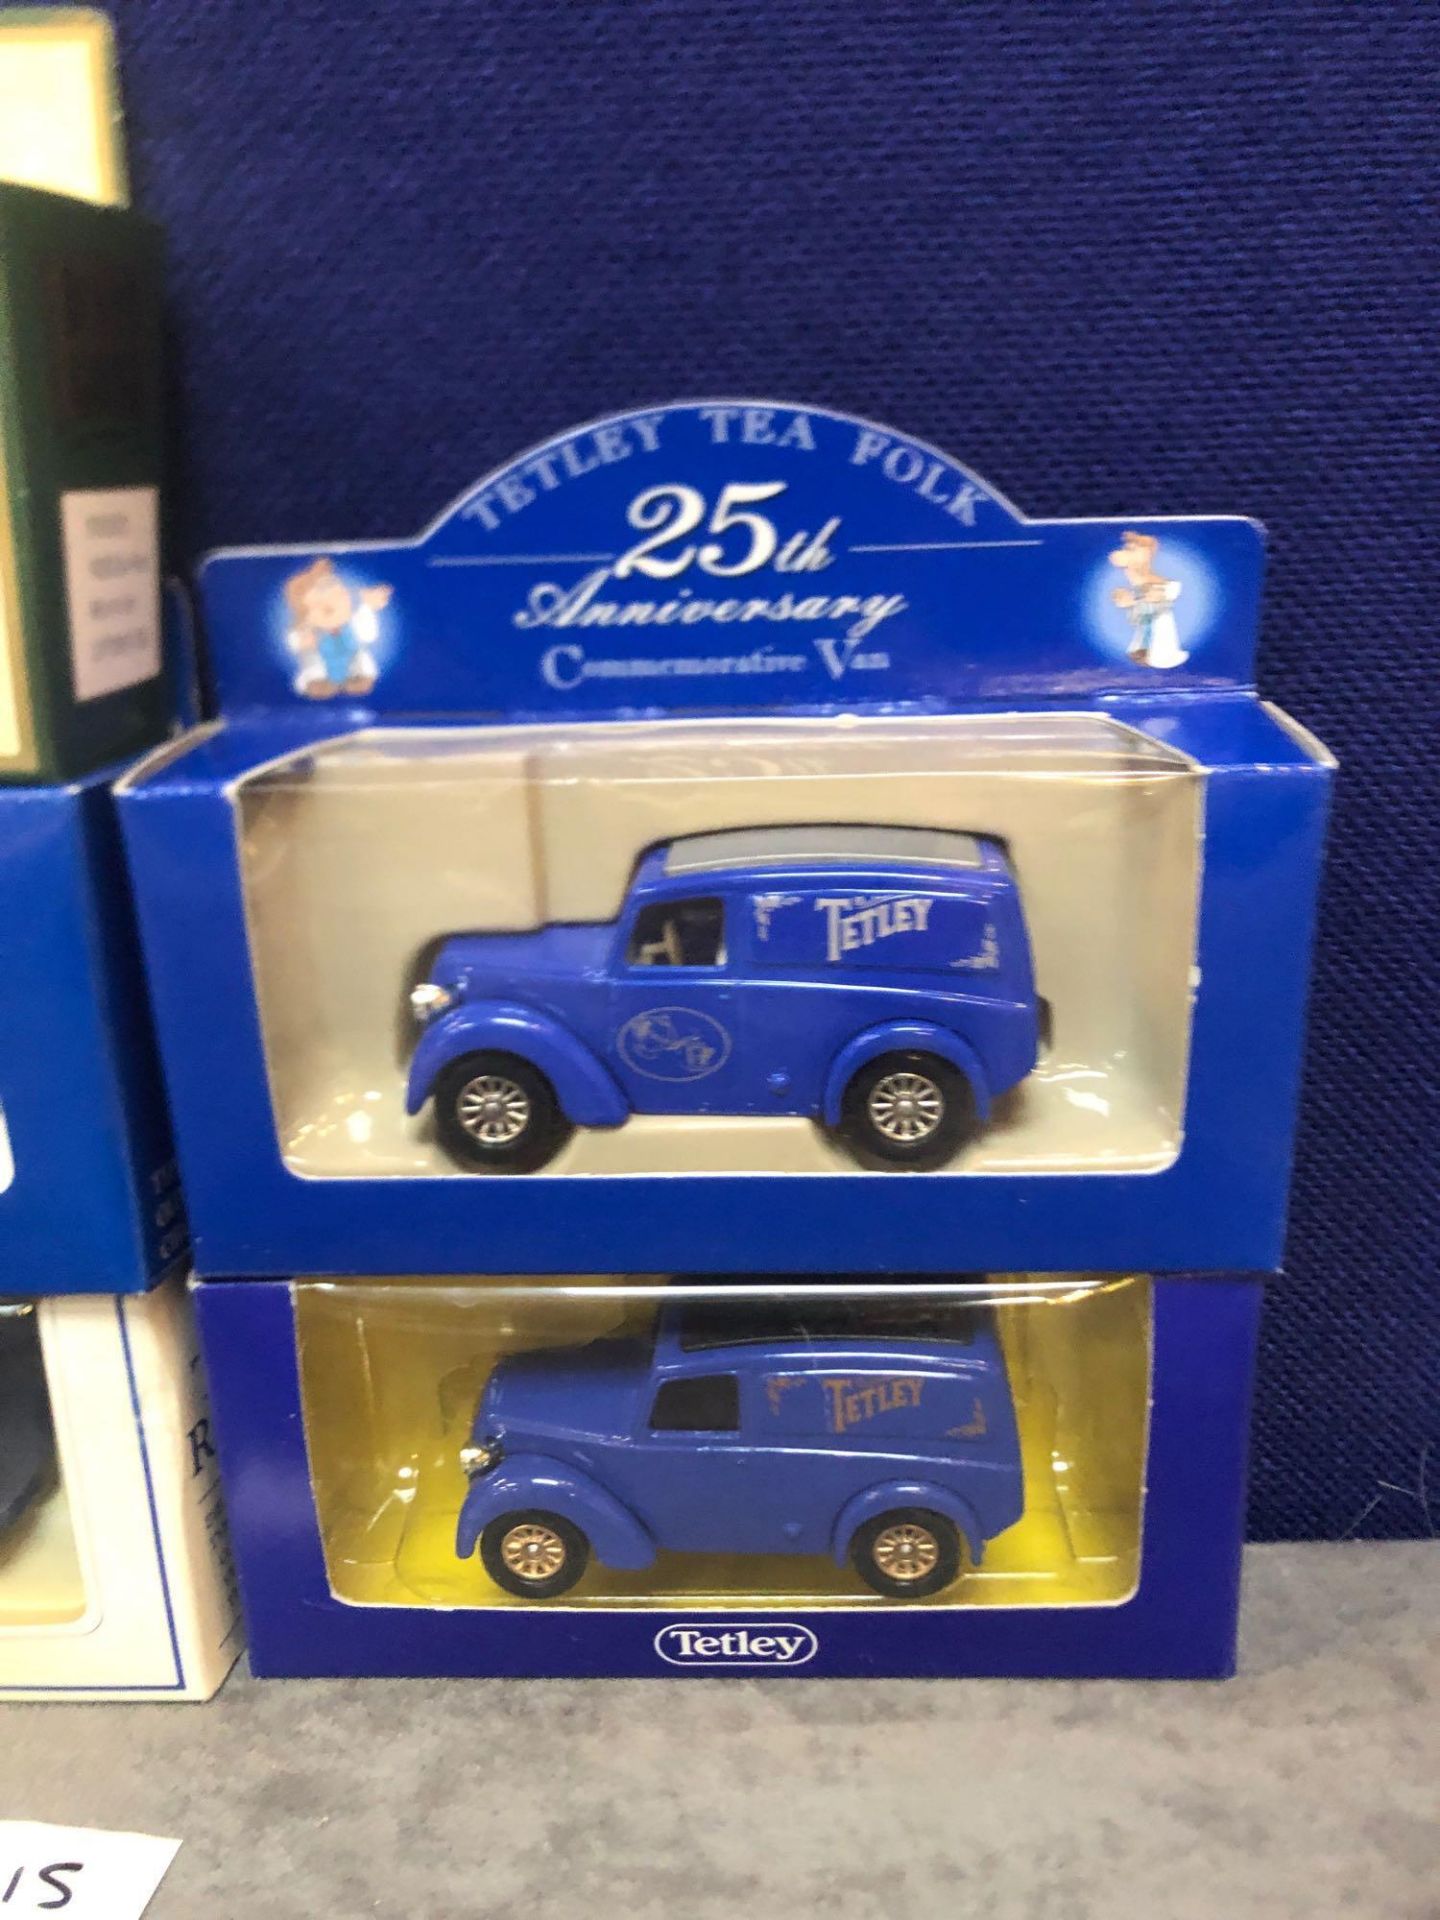 7x Diecast Vehicles Advertising Tea All In Individual Boxes - Image 2 of 4